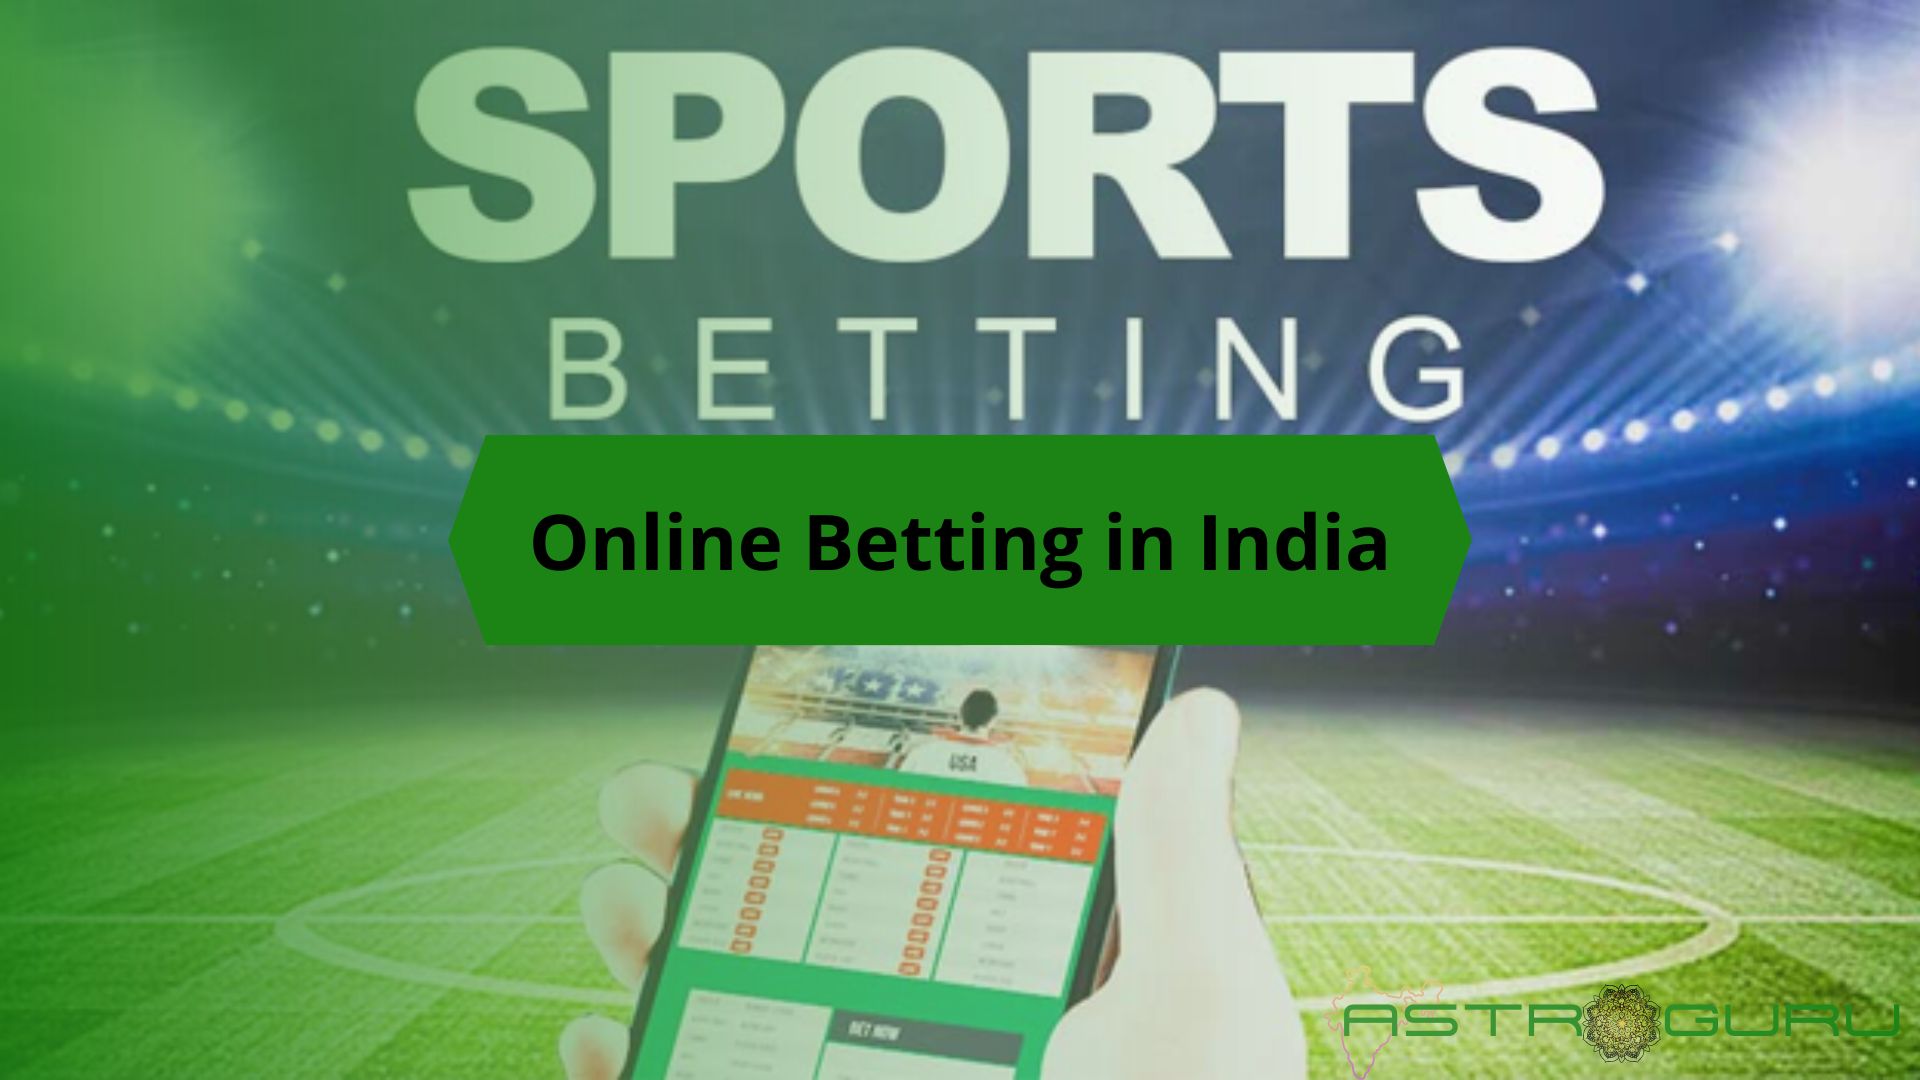 Favorite Internet-based casinos in India offer unparalleled advantages compared to their traditional counterparts. Resources For 2021